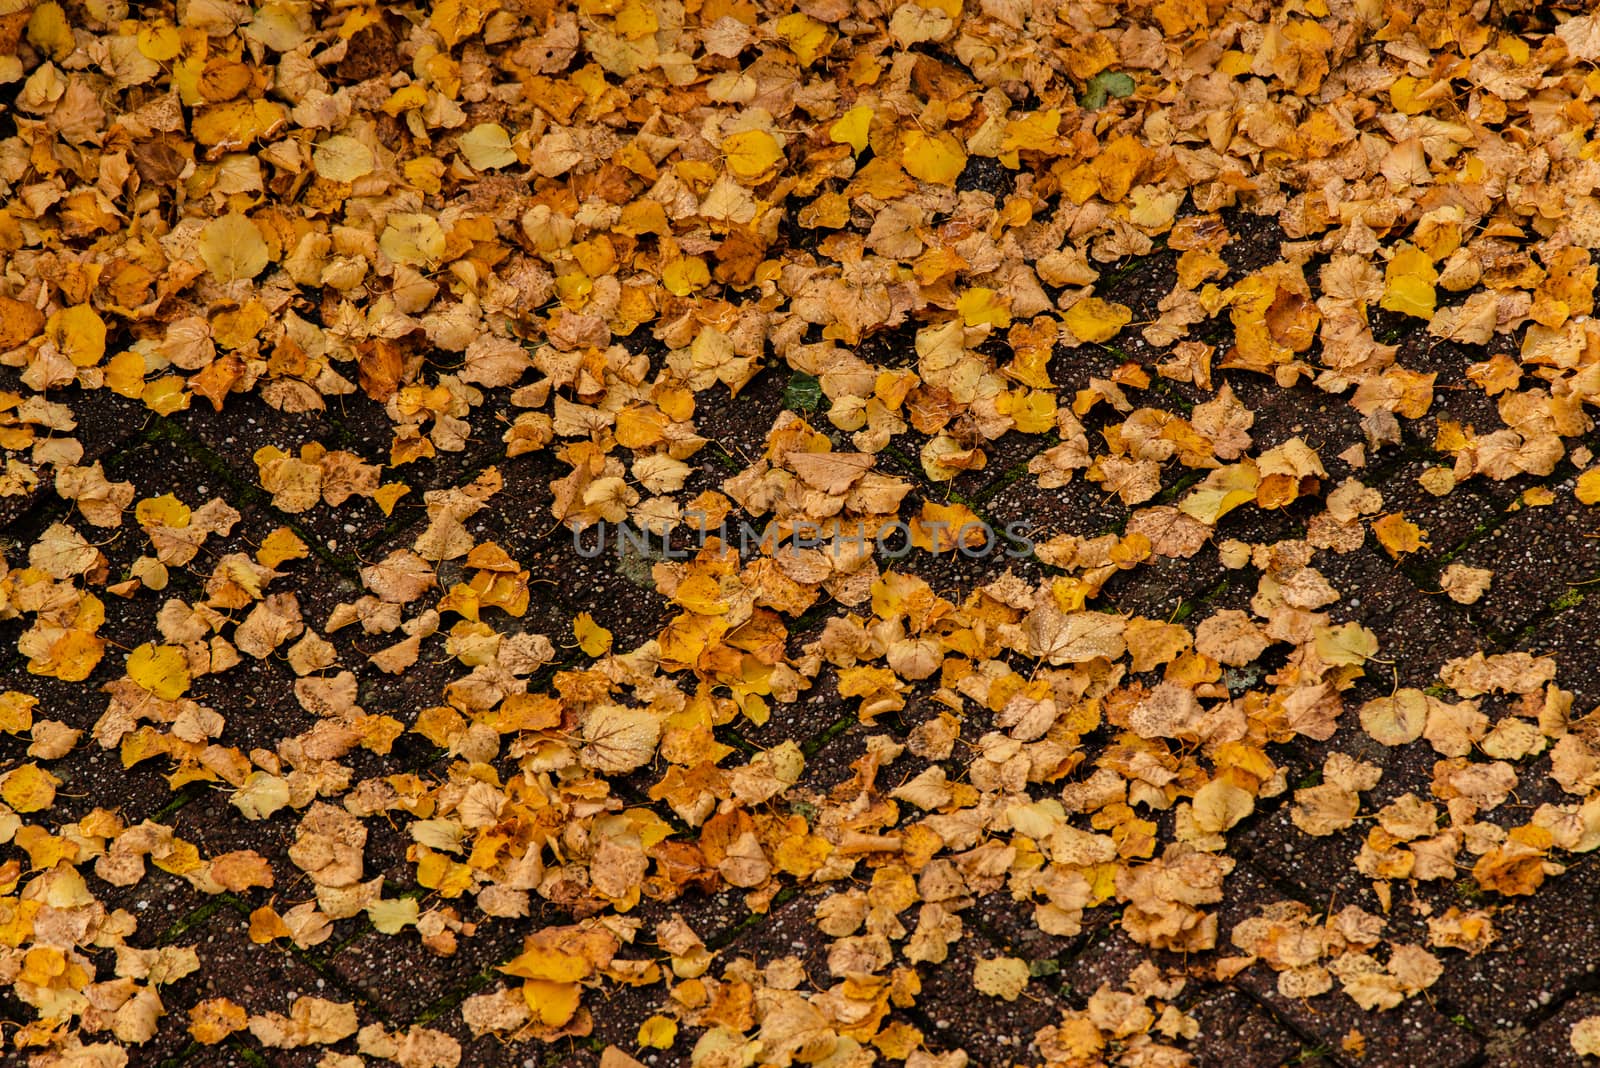 View from above of orange and yellow leaves on the ground.